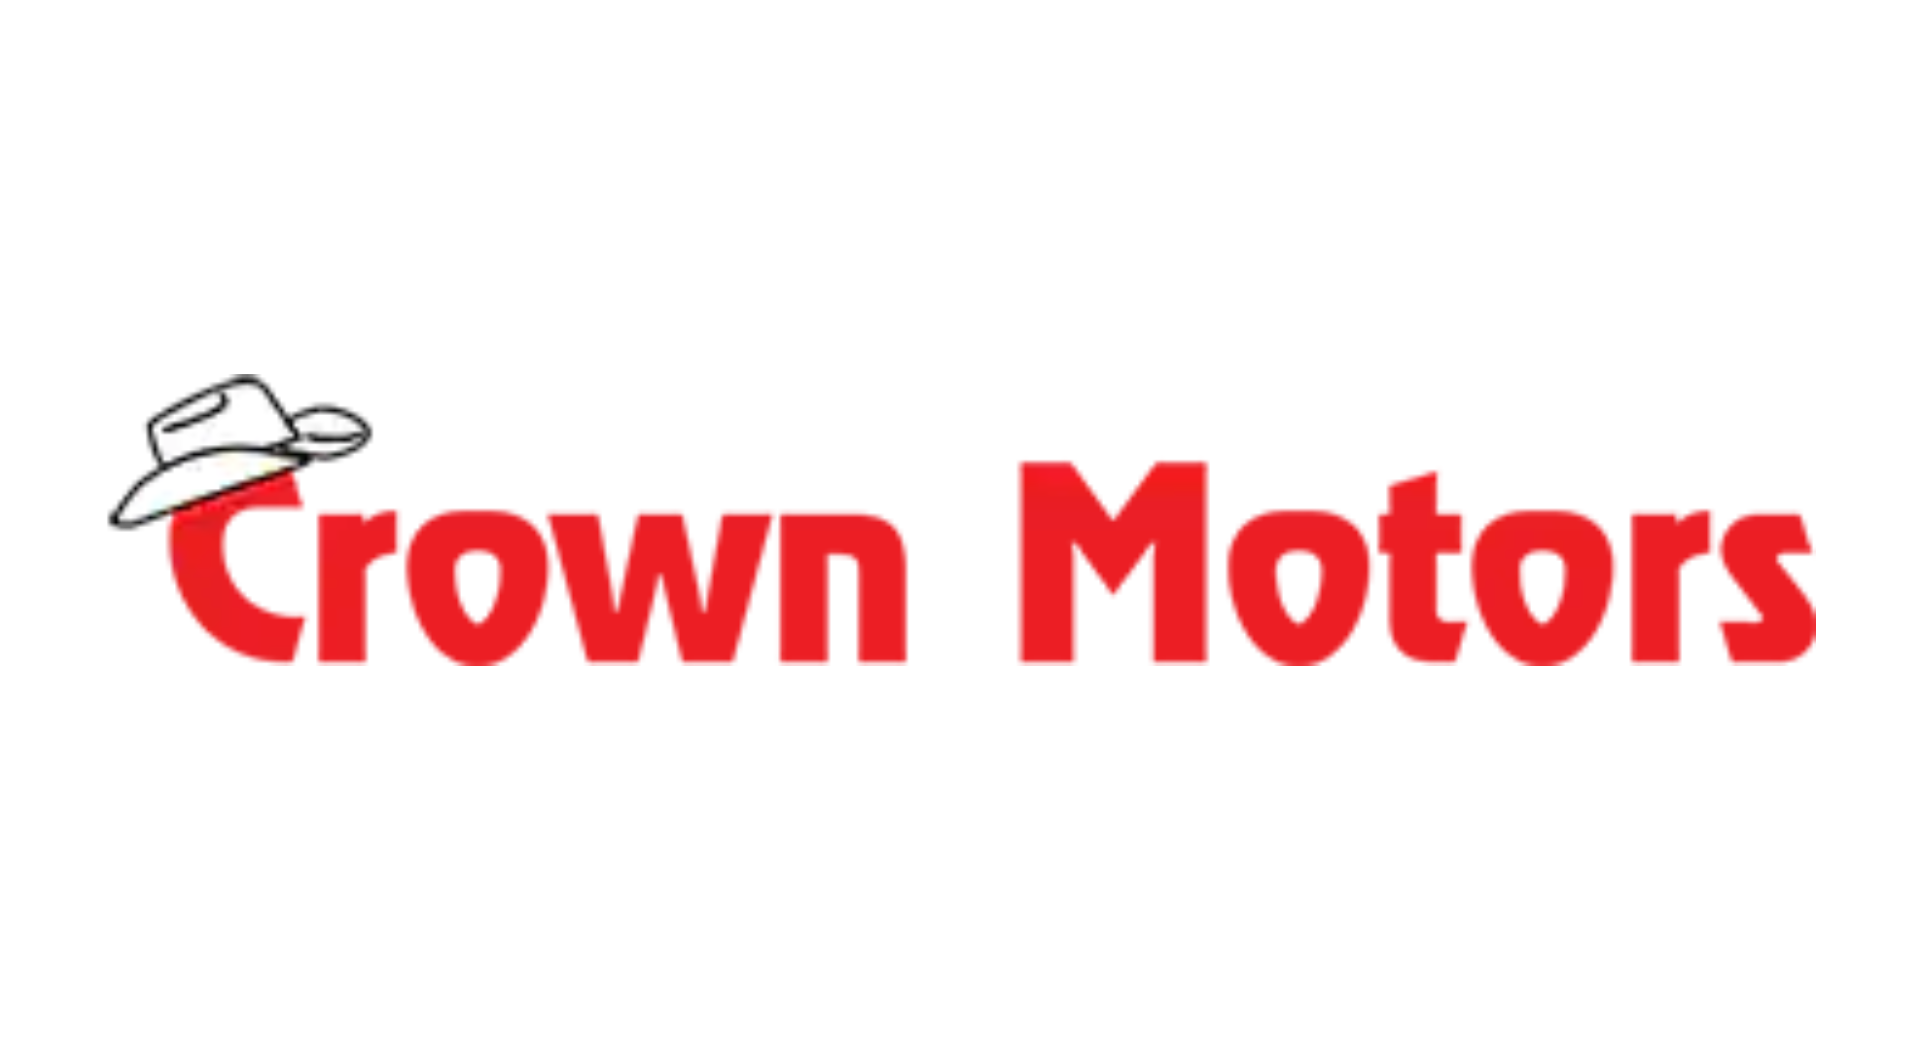 Crown Motors is a Certified Agricultural Dealership